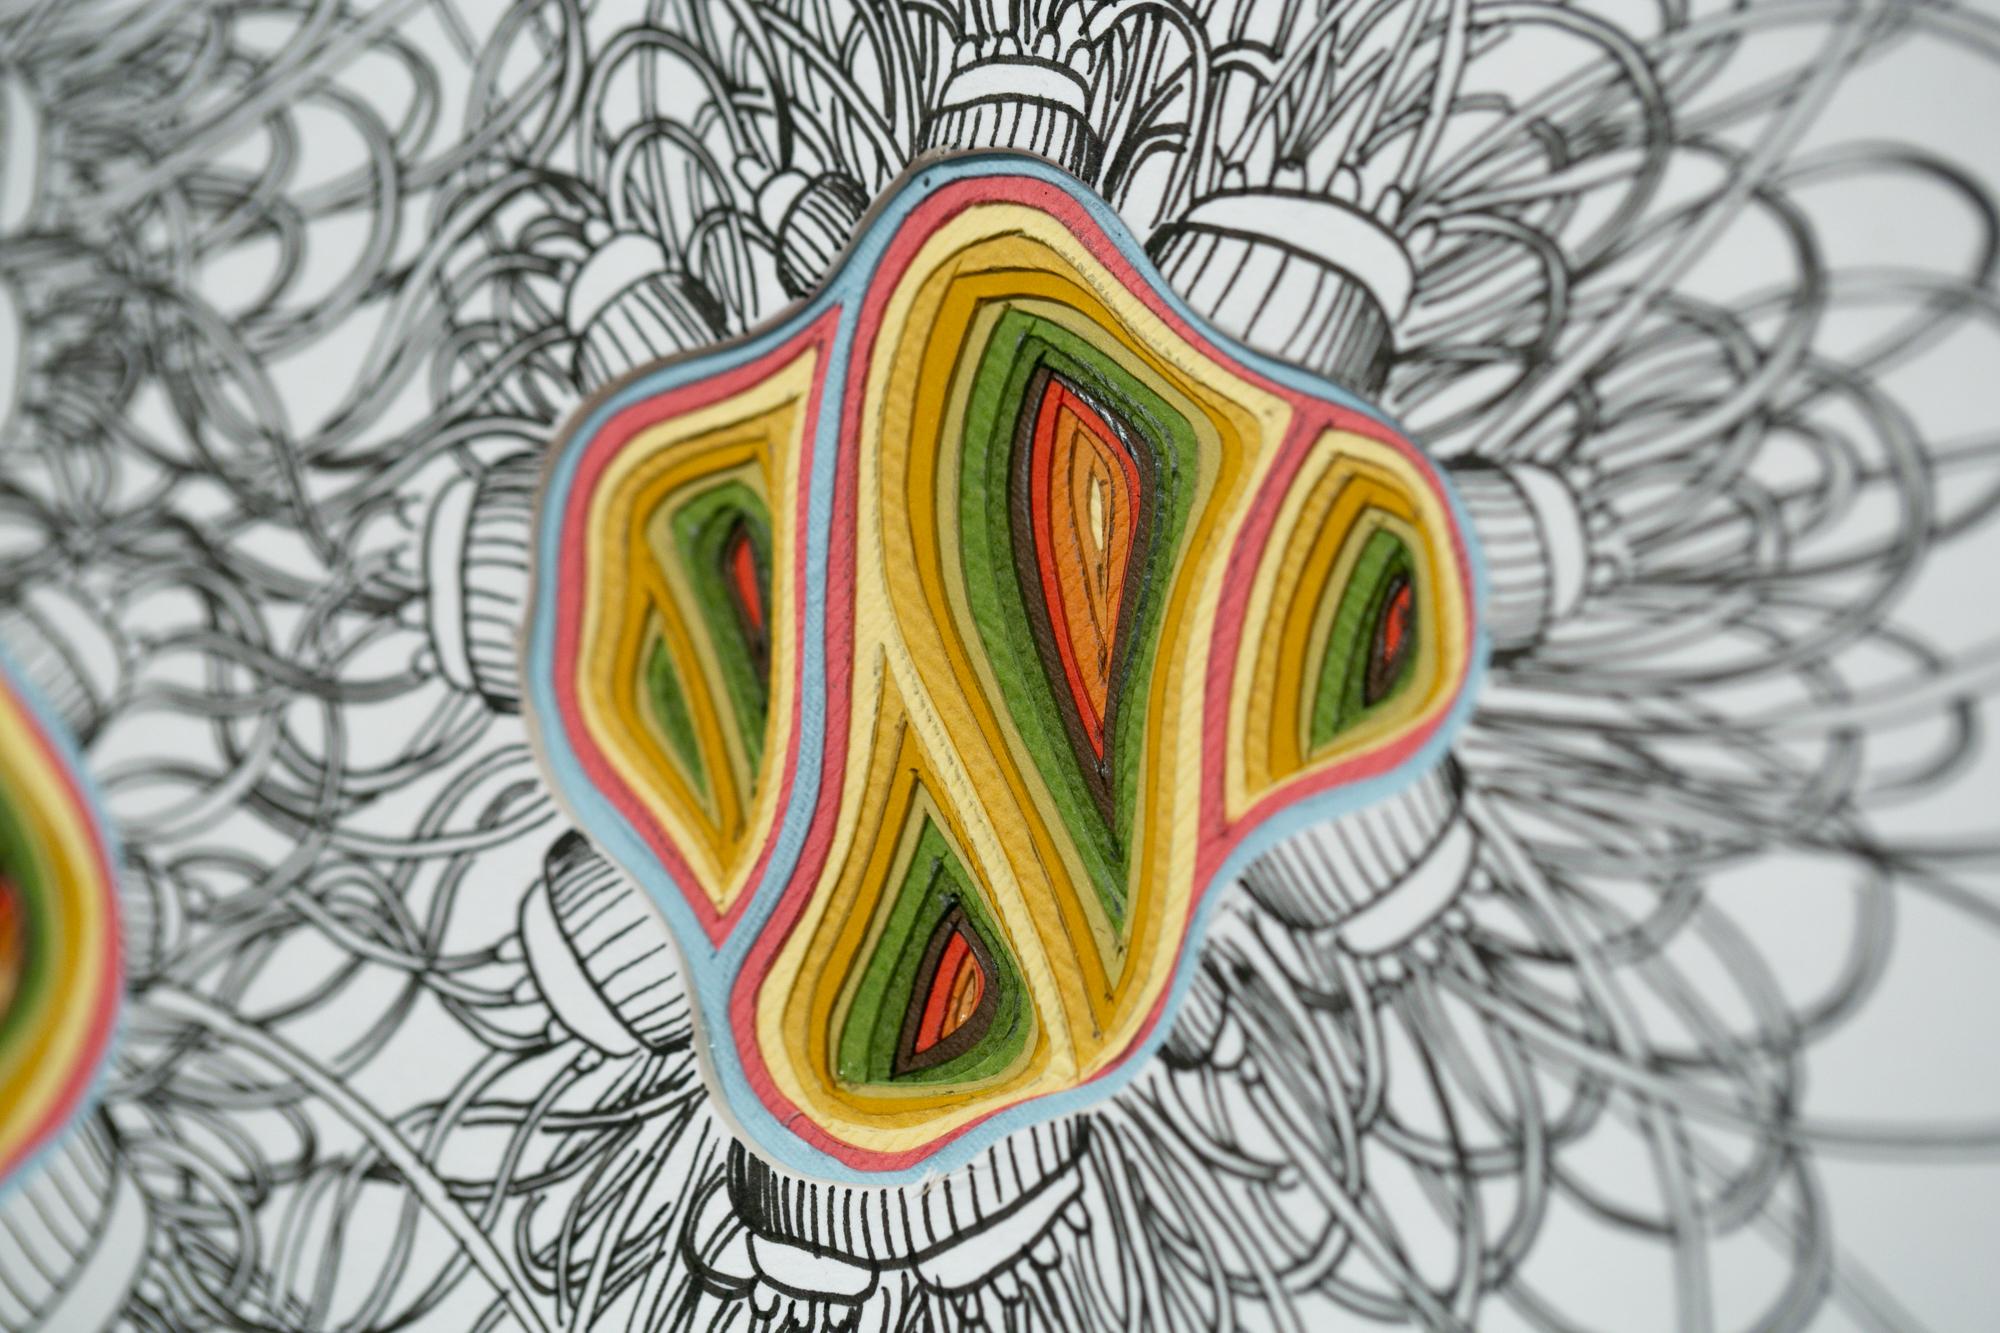 Original multicolored hand-cut paper and ink on illustration board layered paper sculpture by Charles Clary measuring 16